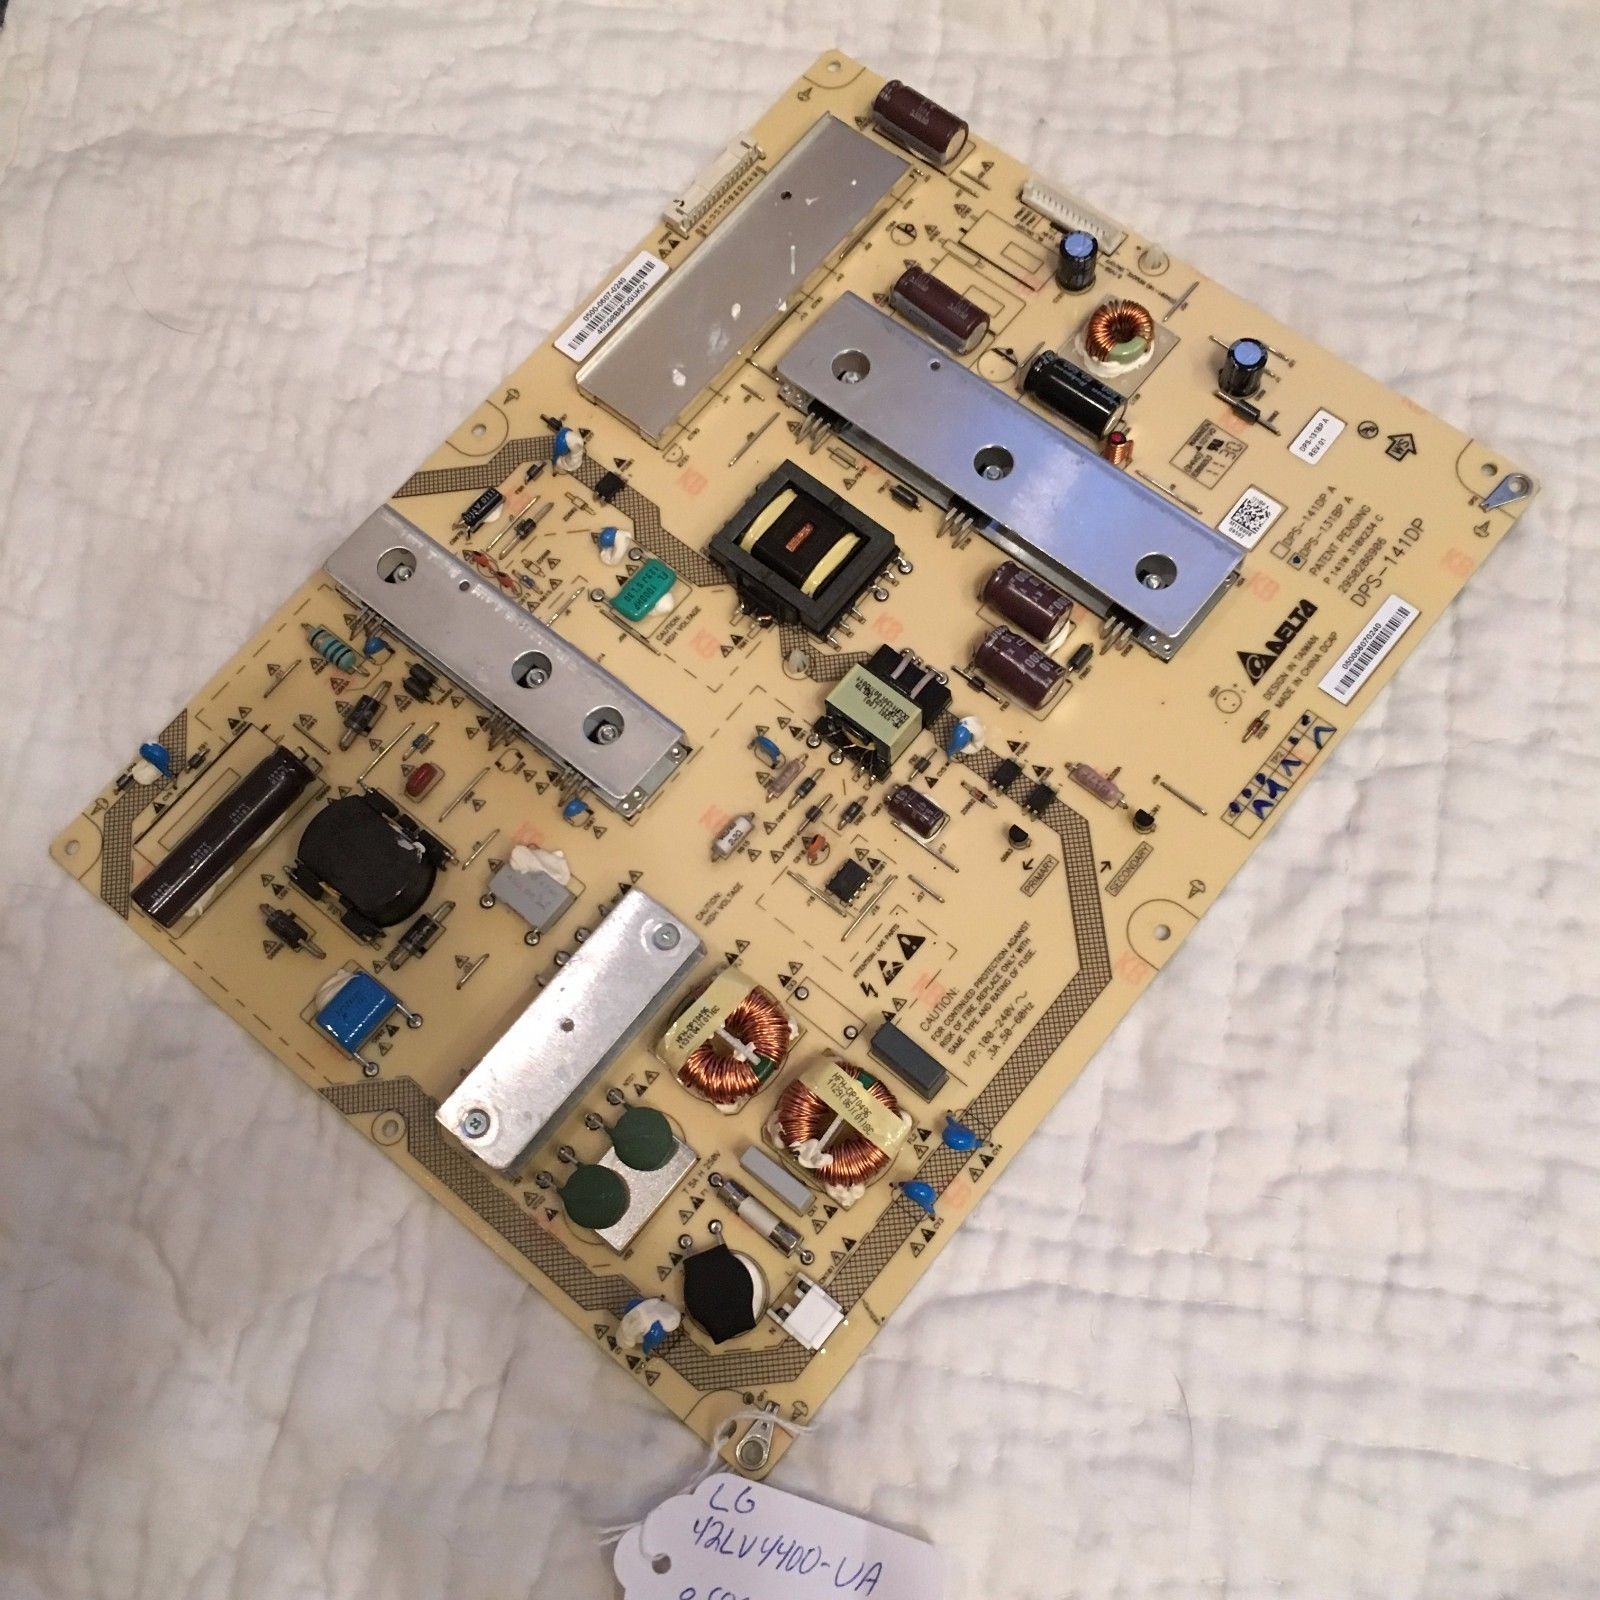 DPS-131BP /LG 0500-0607-0240 A POWER SUPPLY BOARD FOR 42LV4400 A